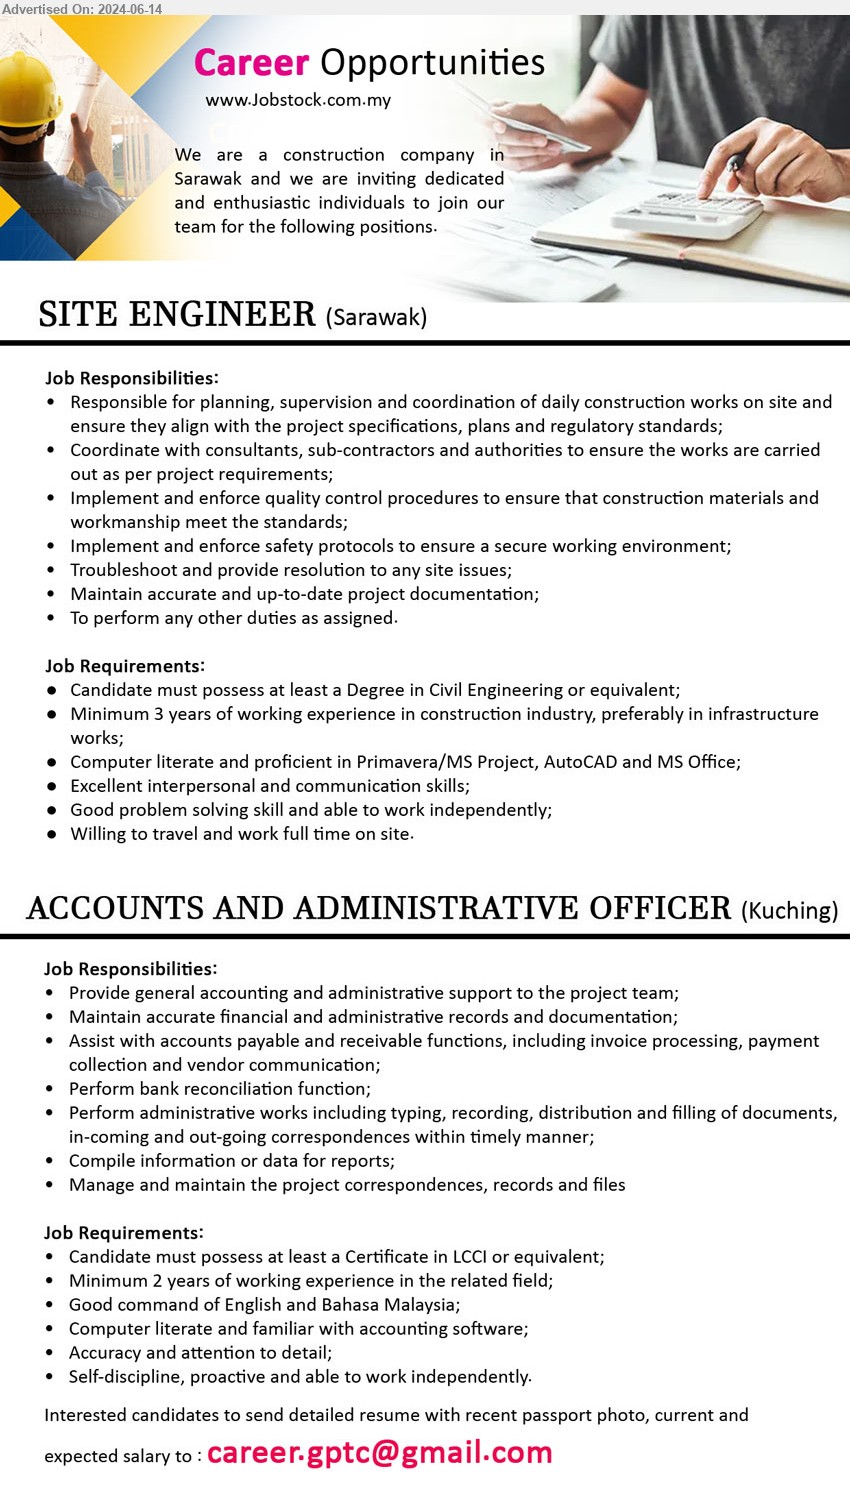 ADVERTISER (Construction Company) - 1. SITE ENGINEER (Sarawak),  Degree in Civil Engineering, 3 yrs. exp. in construction industry,...
2. ACCOUNTS AND ADMINISTRATIVE OFFICER (Kuching), Certificate in LCCI, 2 yrs. exp., Computer literate and familiar with accounting software;,...
Email resume to ...